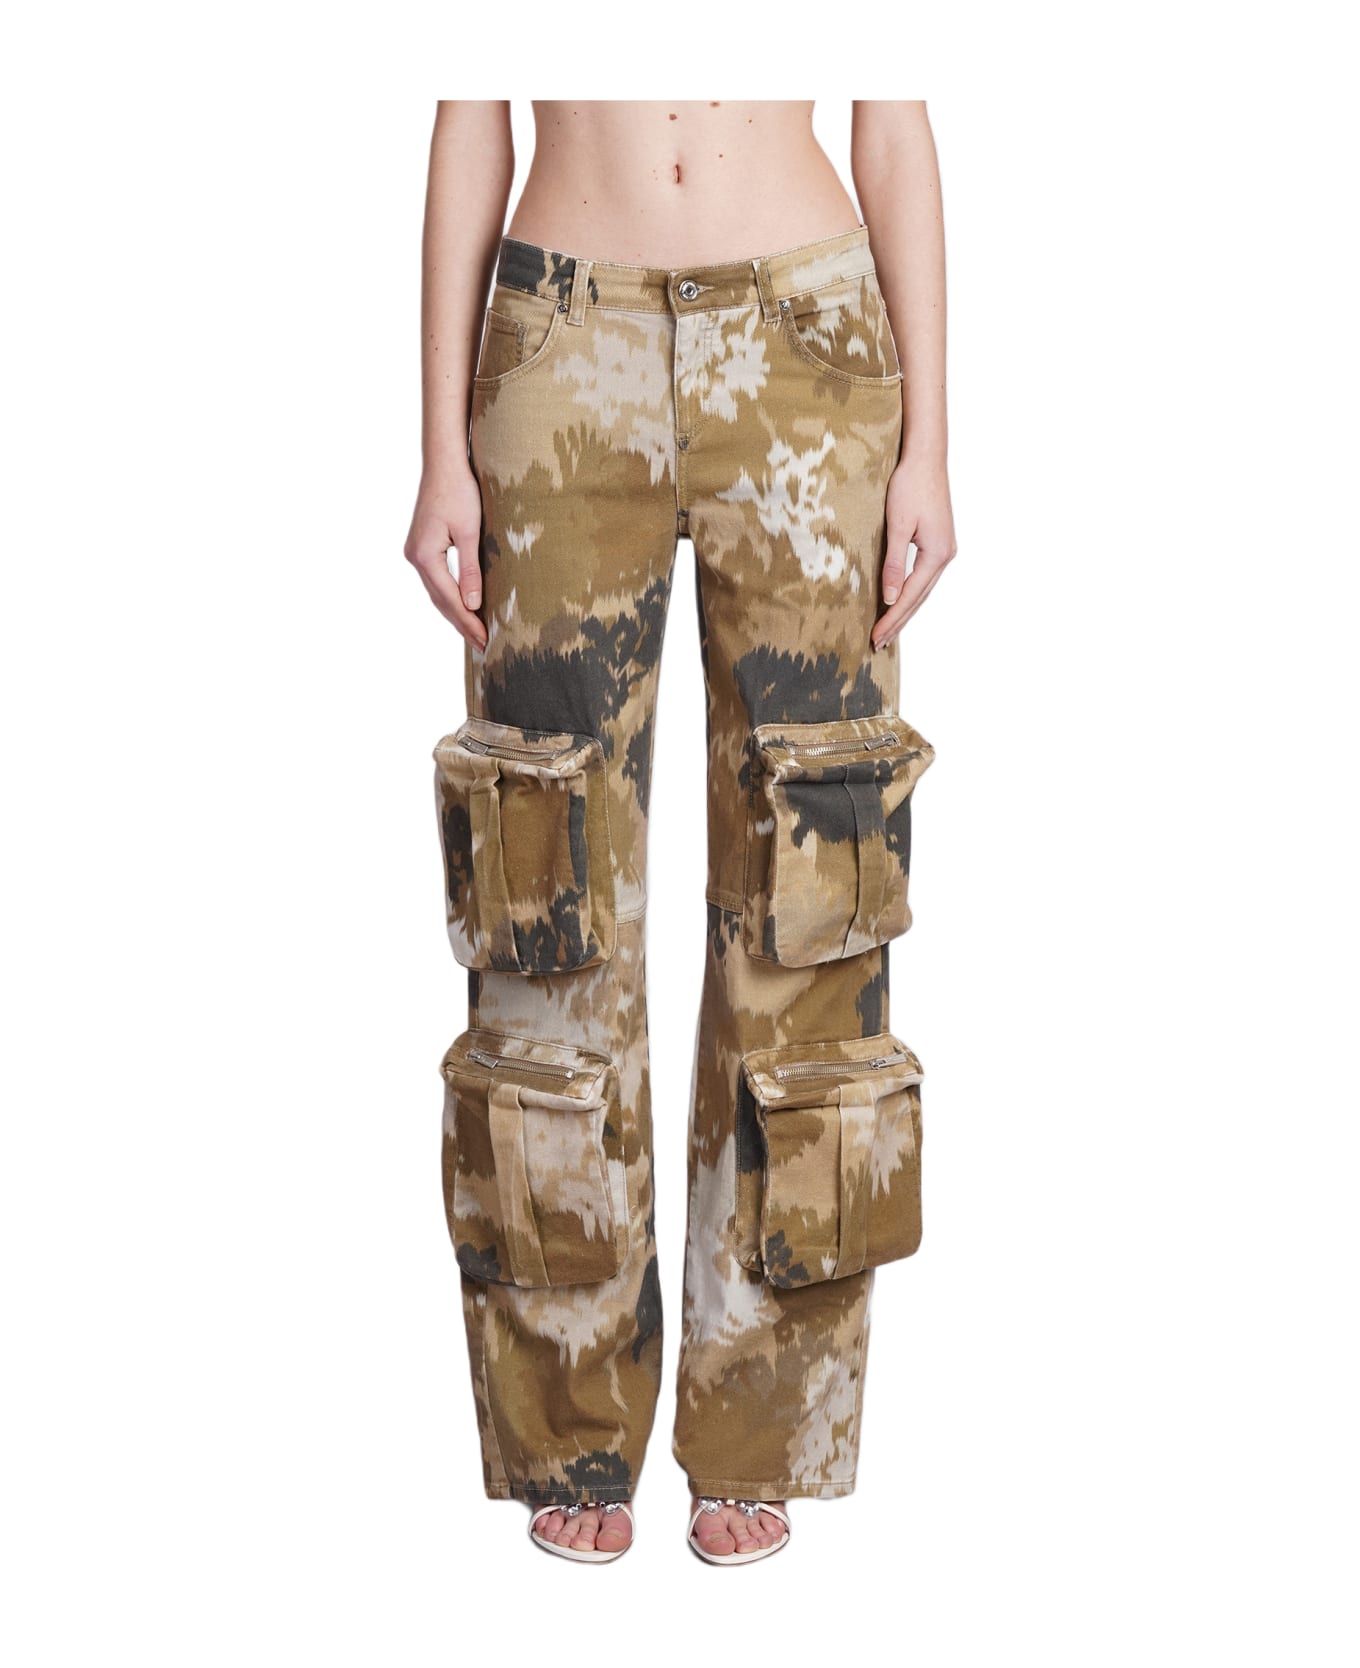 Blumarine Pants In Camouflage Cotton - BROWN ボトムス